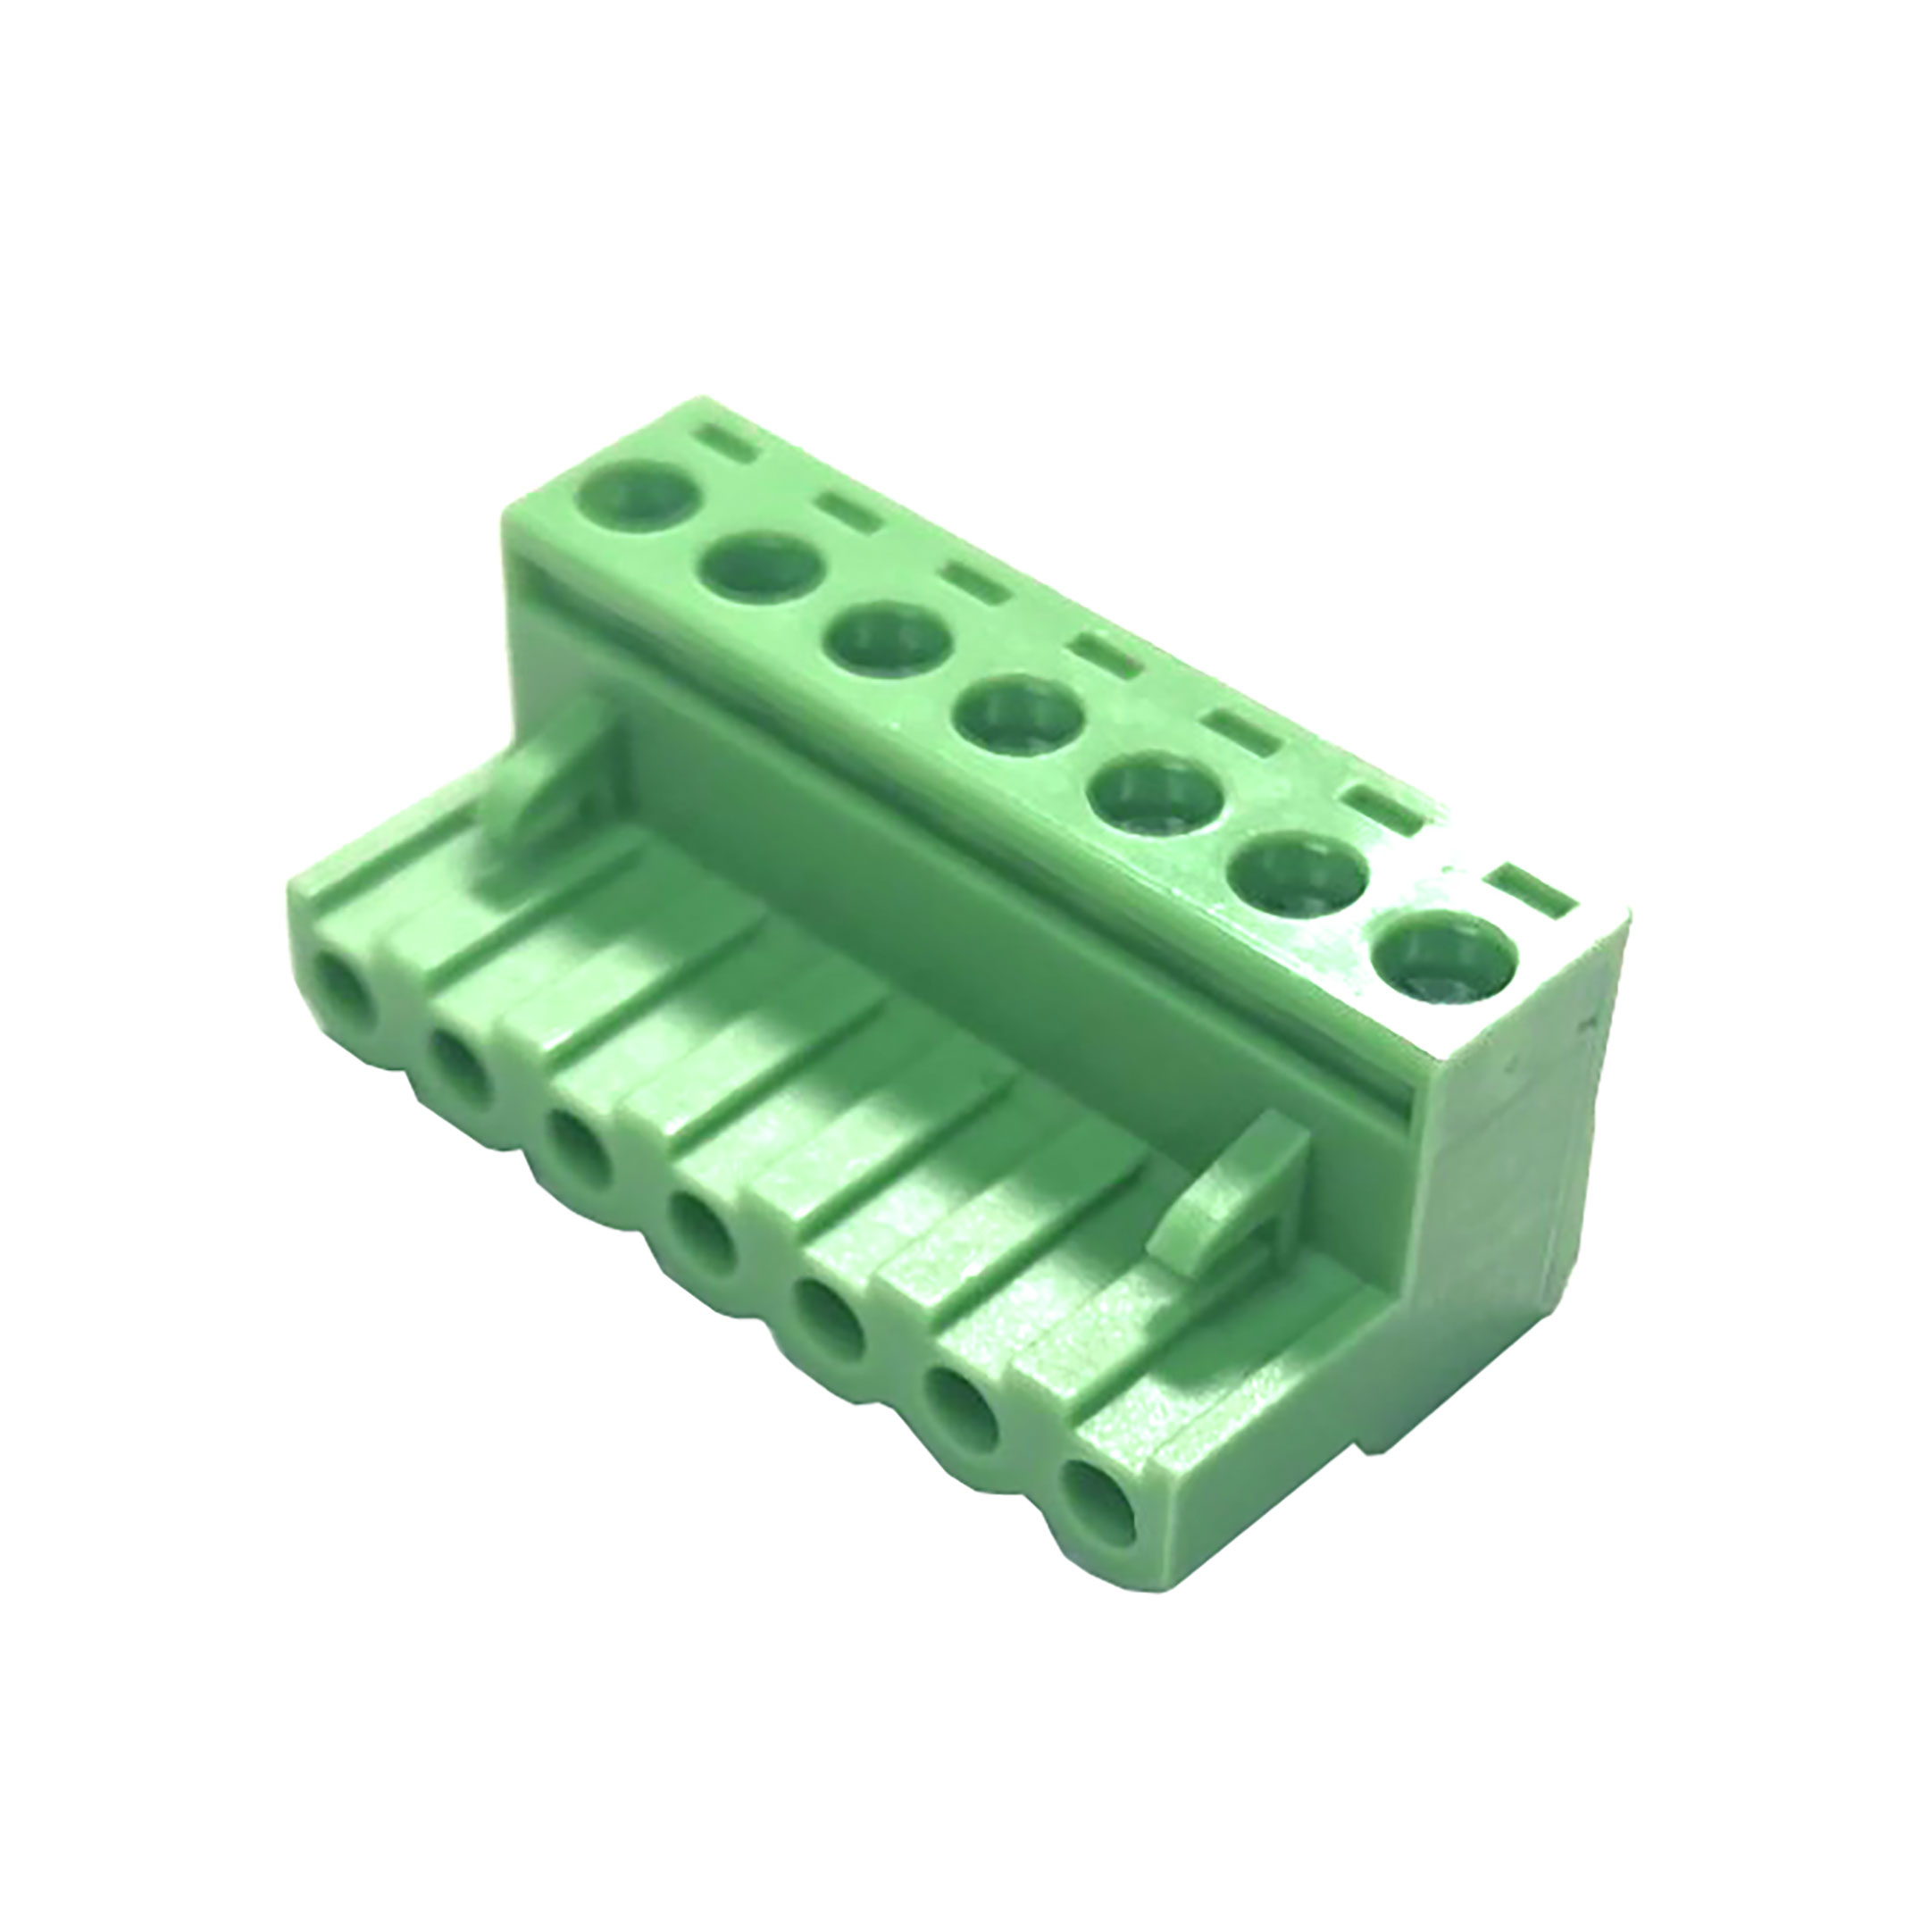 6617 Terminal Block Connector, Seven Pin, Female (five included with 5811 dimmer)